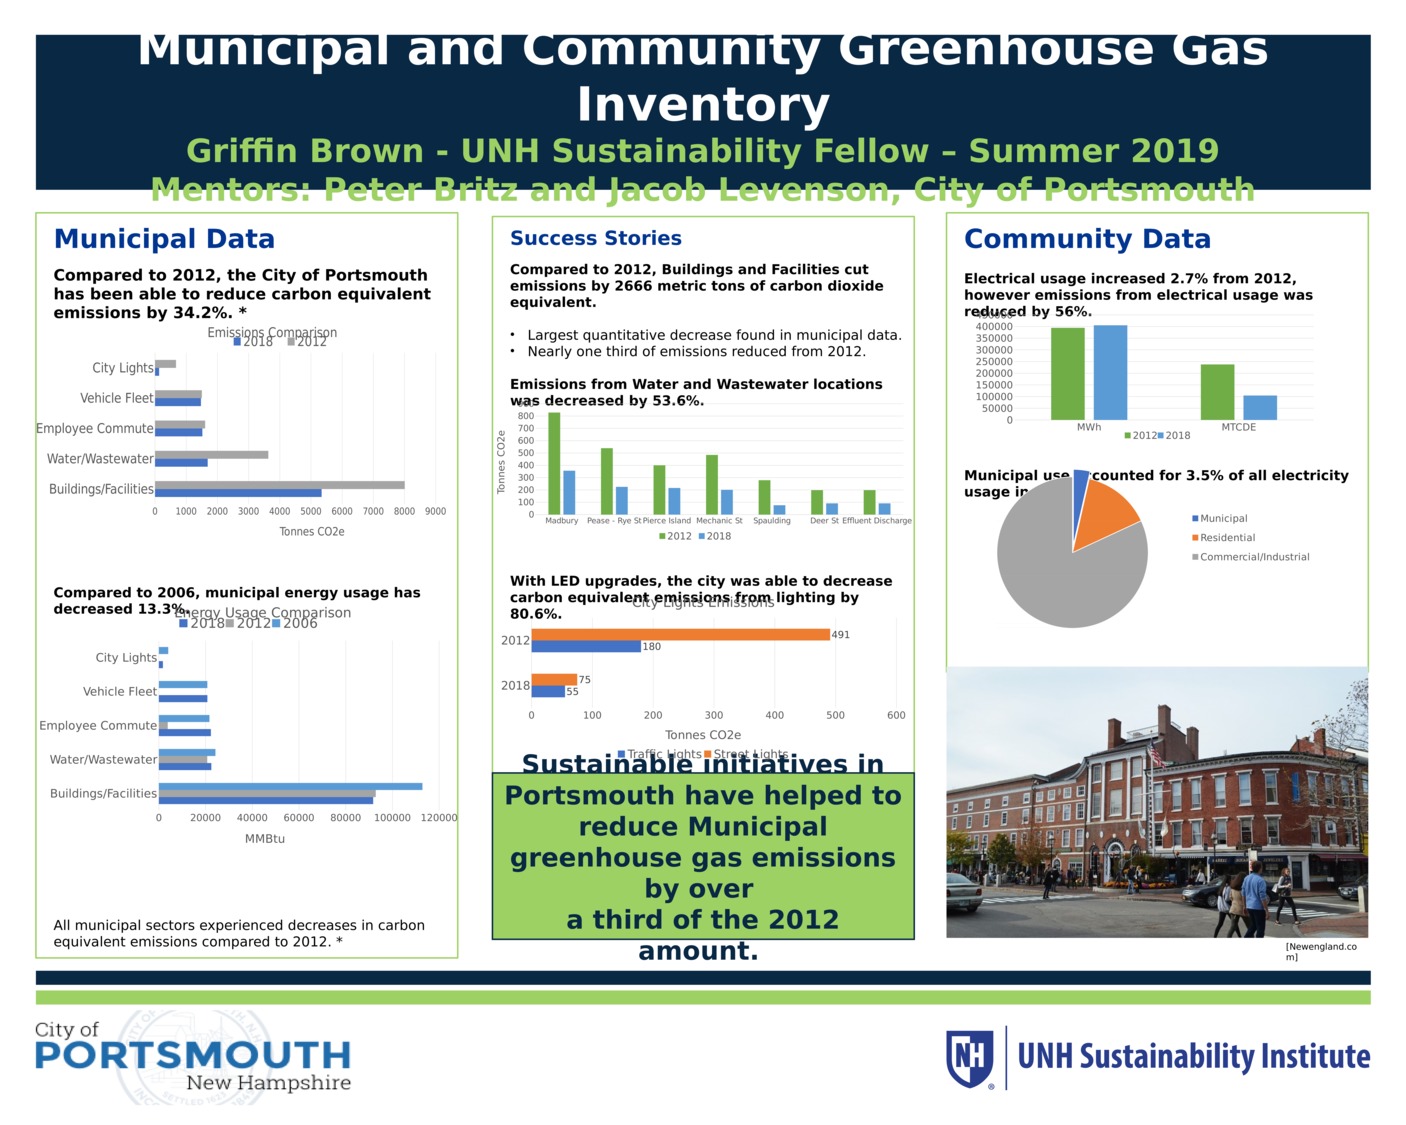 Municipal And Community Greenhouse Gas Inventory: Portsmouth New Hampshire by gb1094